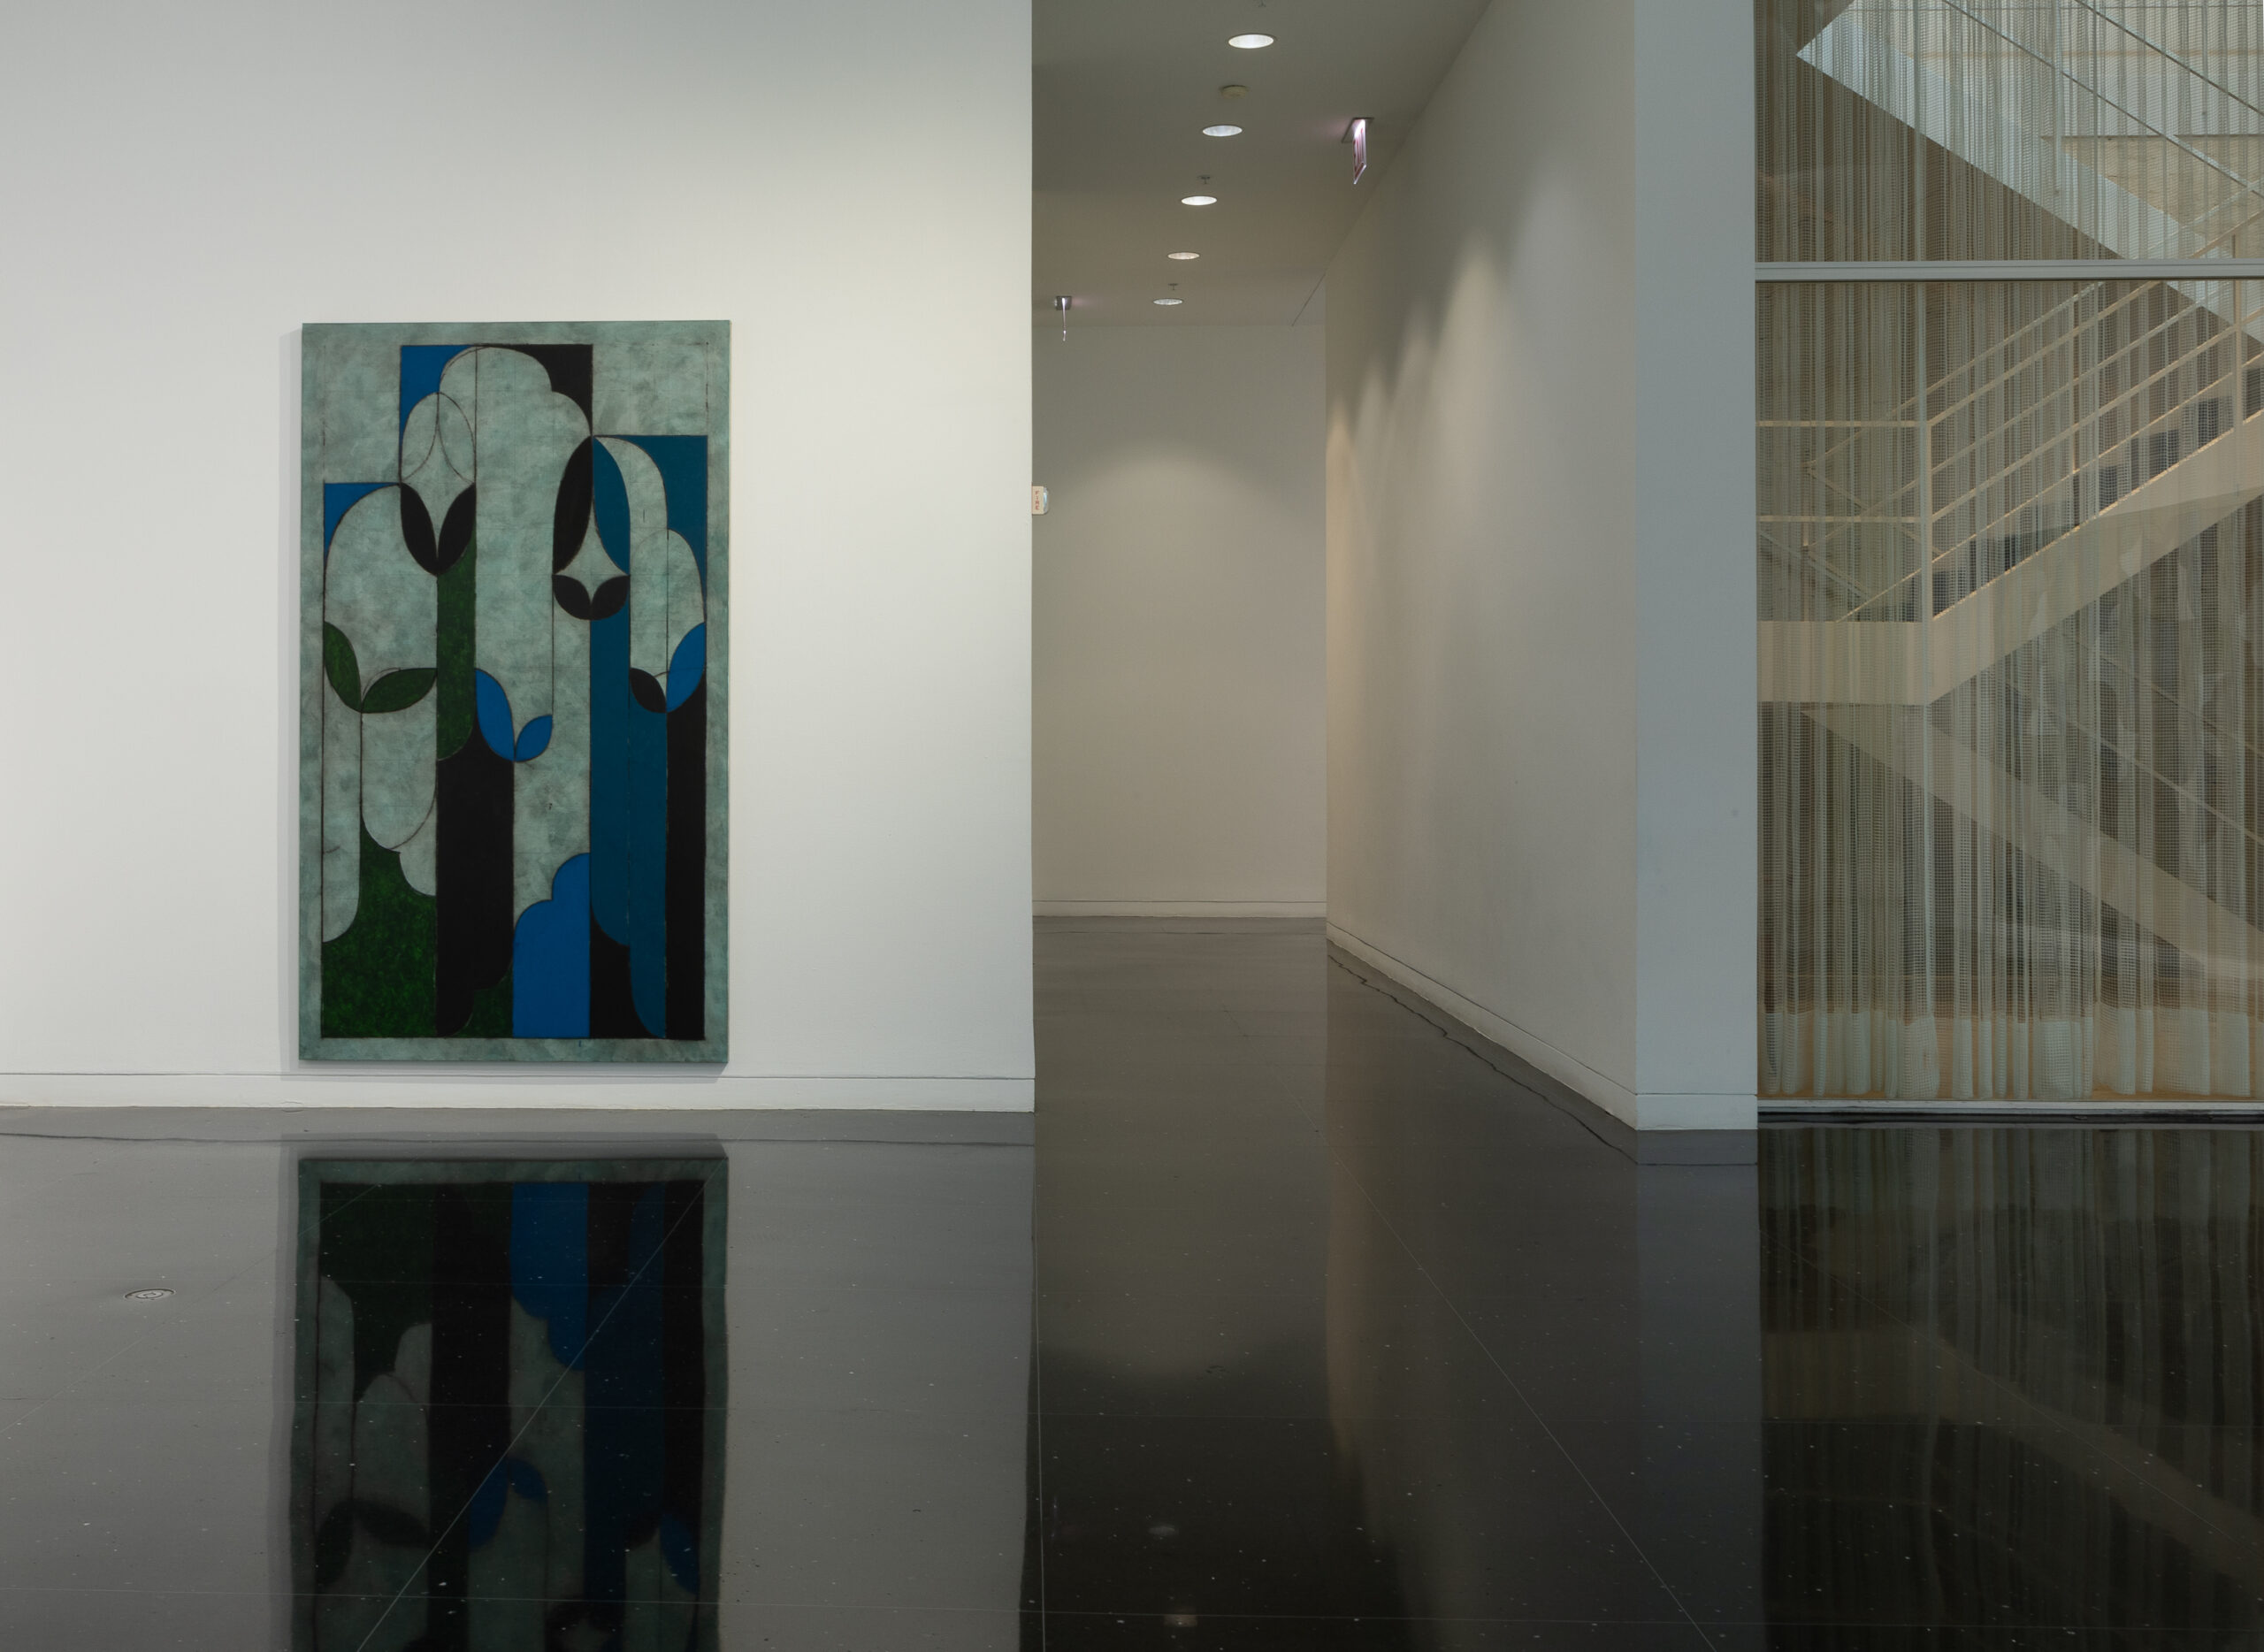 A blank white corridor to the left of which is hung an abstract painting of geometric and curvilinear forms in shades of blue and gray.